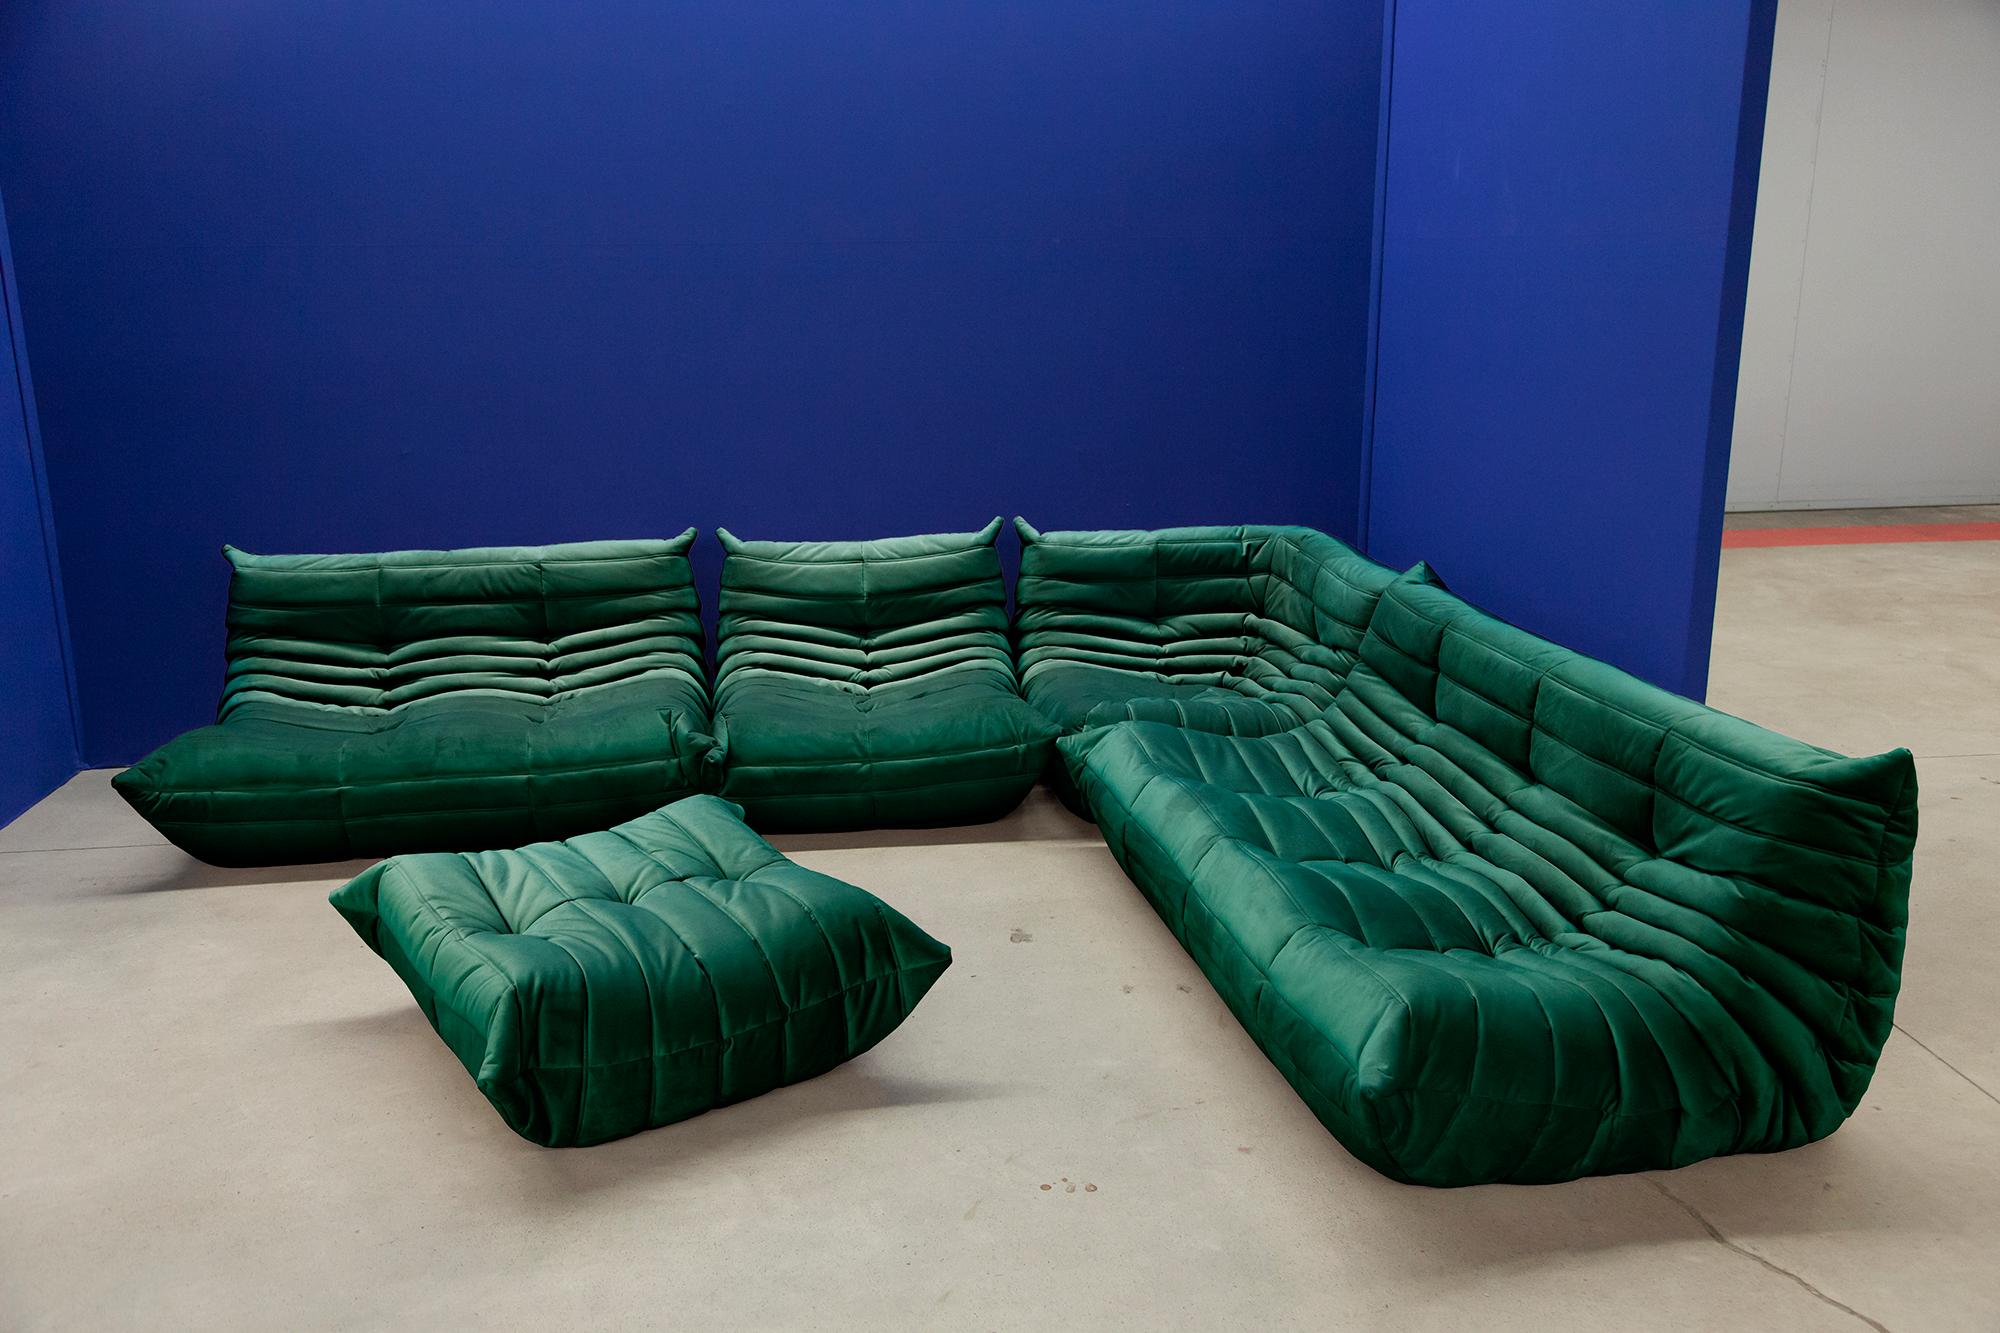 This Togo living room set was designed by Michel Ducaroy in 1973 and was manufactured by Ligne Roset in France. Each piece has the original Ligne Roset logo and genuine bottom. It has been reupholstered in genuine high quality bottle green velvet